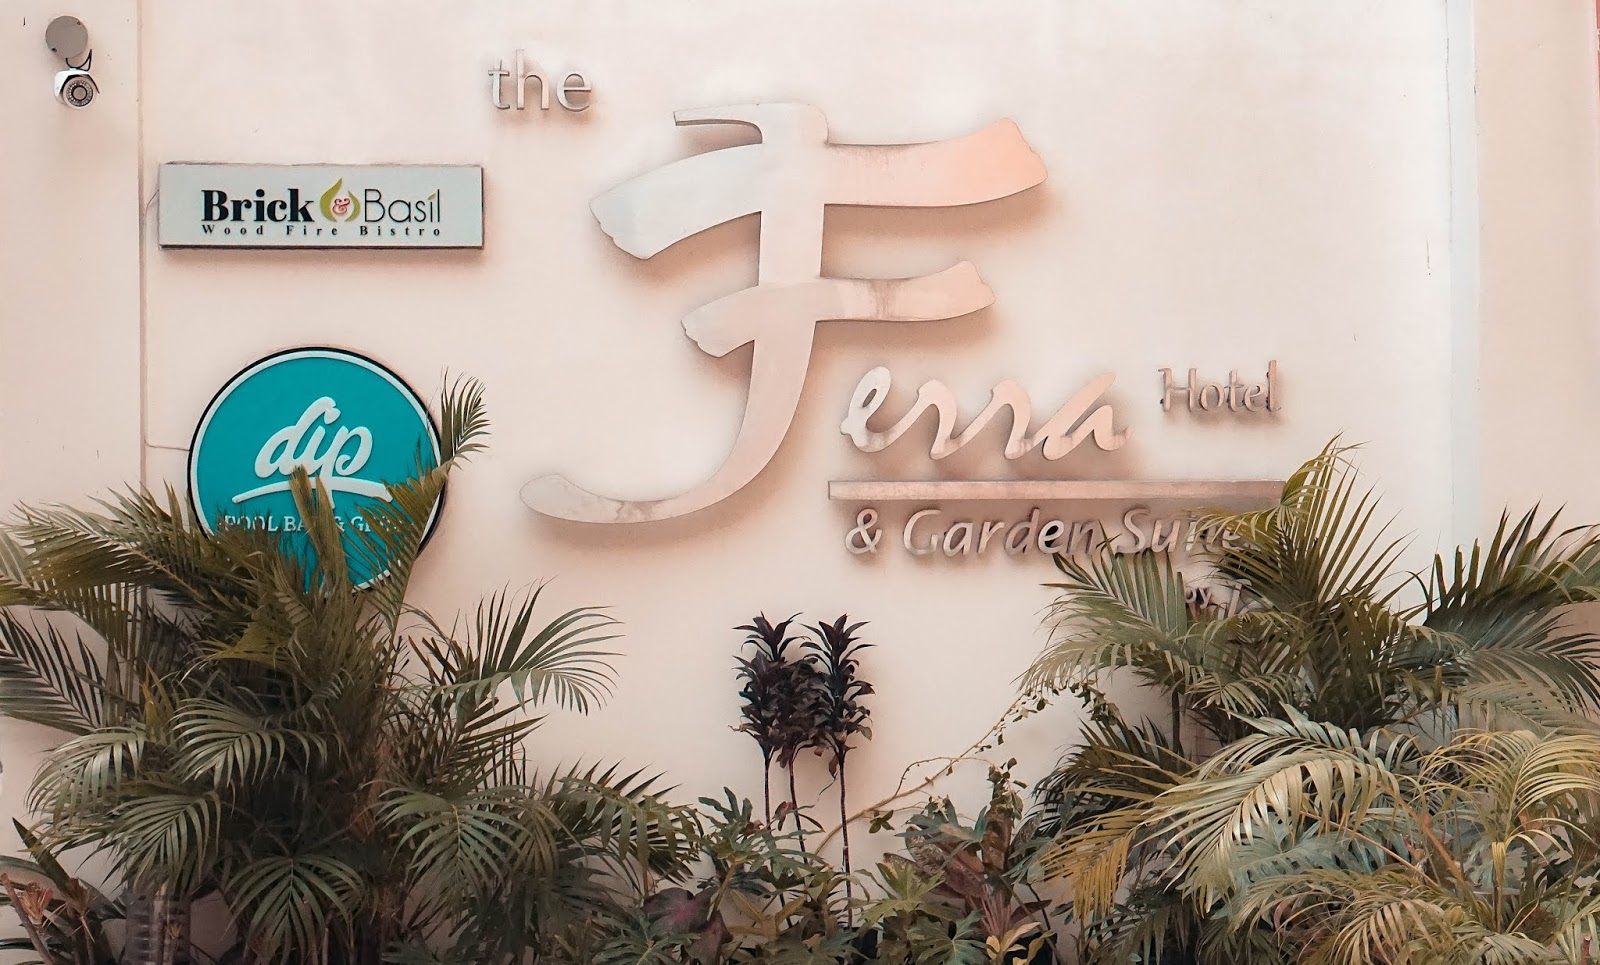 Ferra Hotel and Garden Suites, where to stay in Boracay